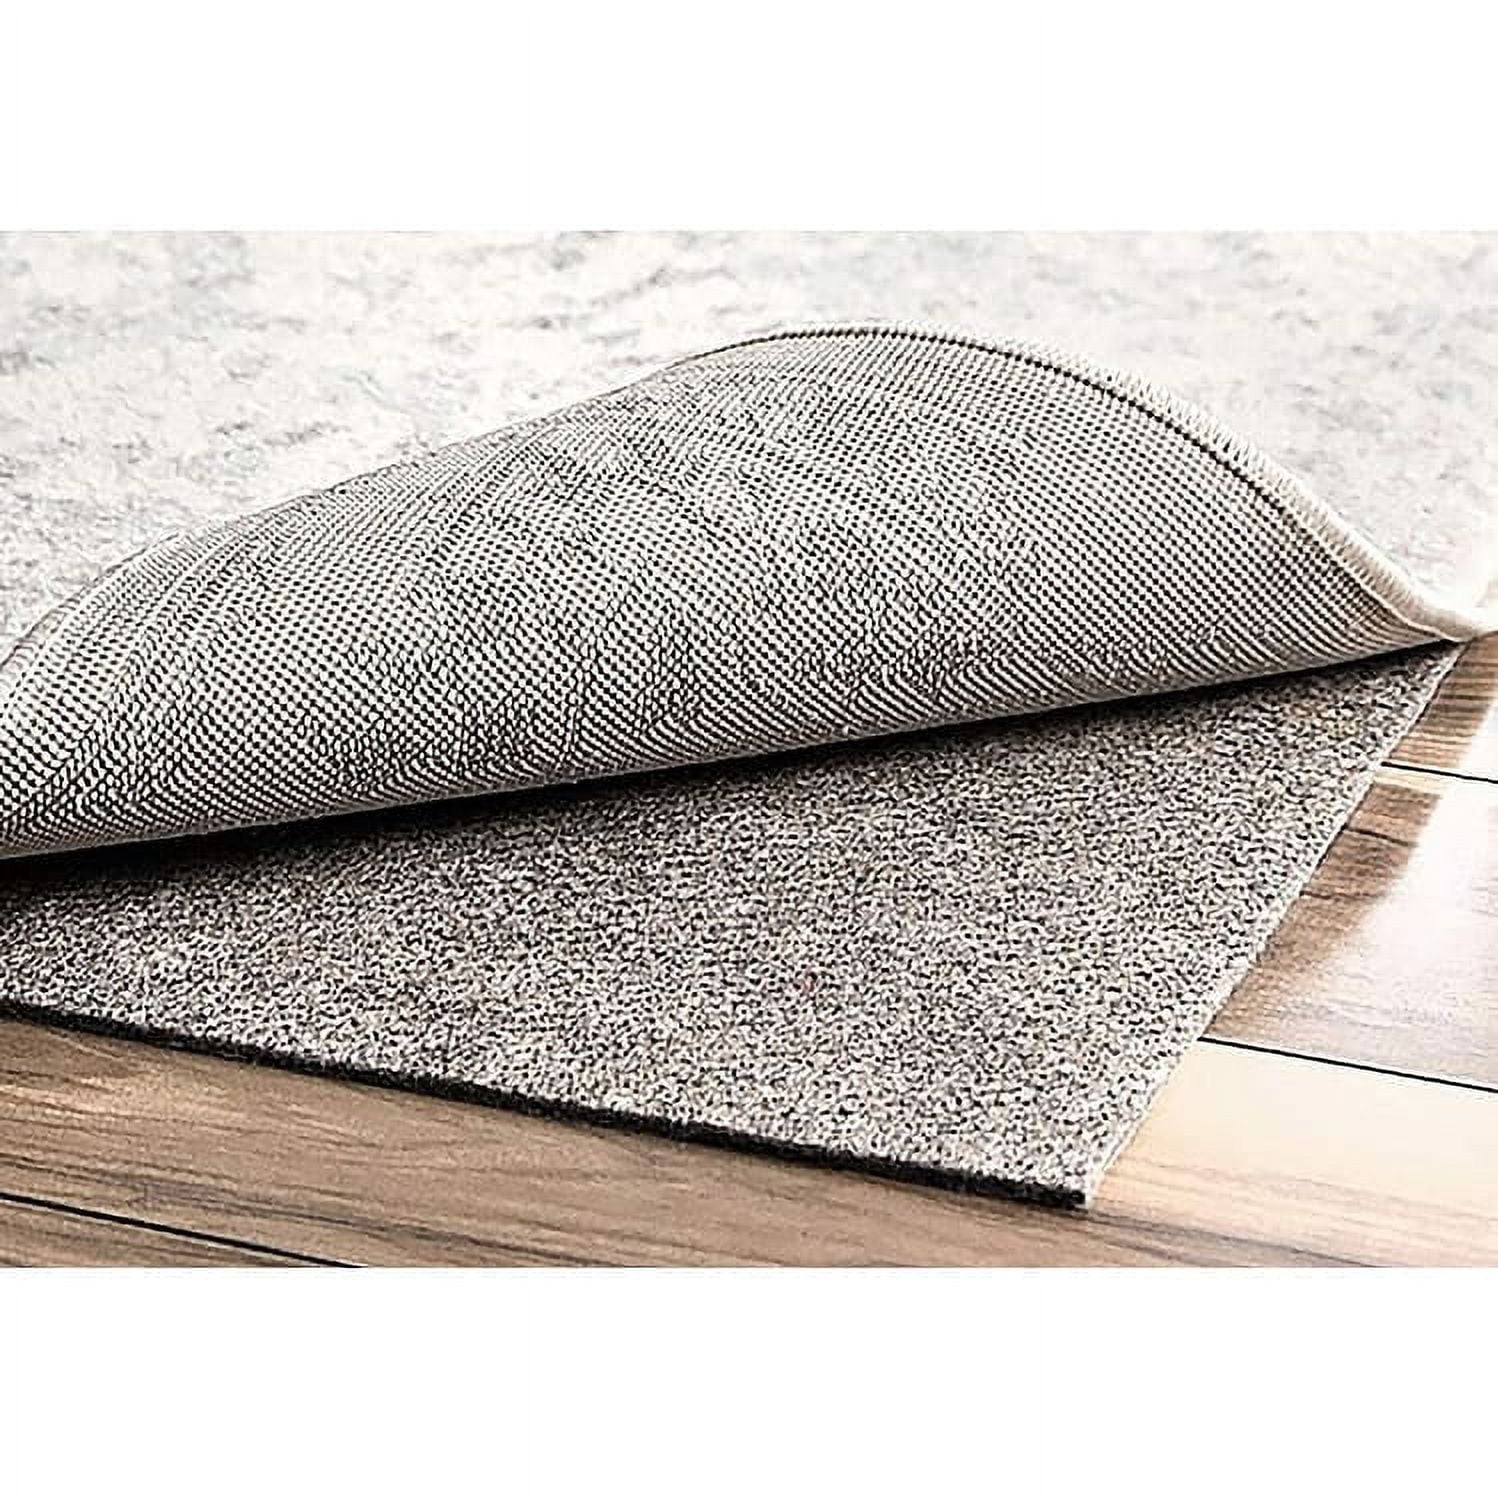 Non-slip Grey Noise Reducing Carpet Mat Rug Pad for Hard Floors 7' x 9' 6'  x 9', 6' Round/Square, 7' x 9' Rectangle